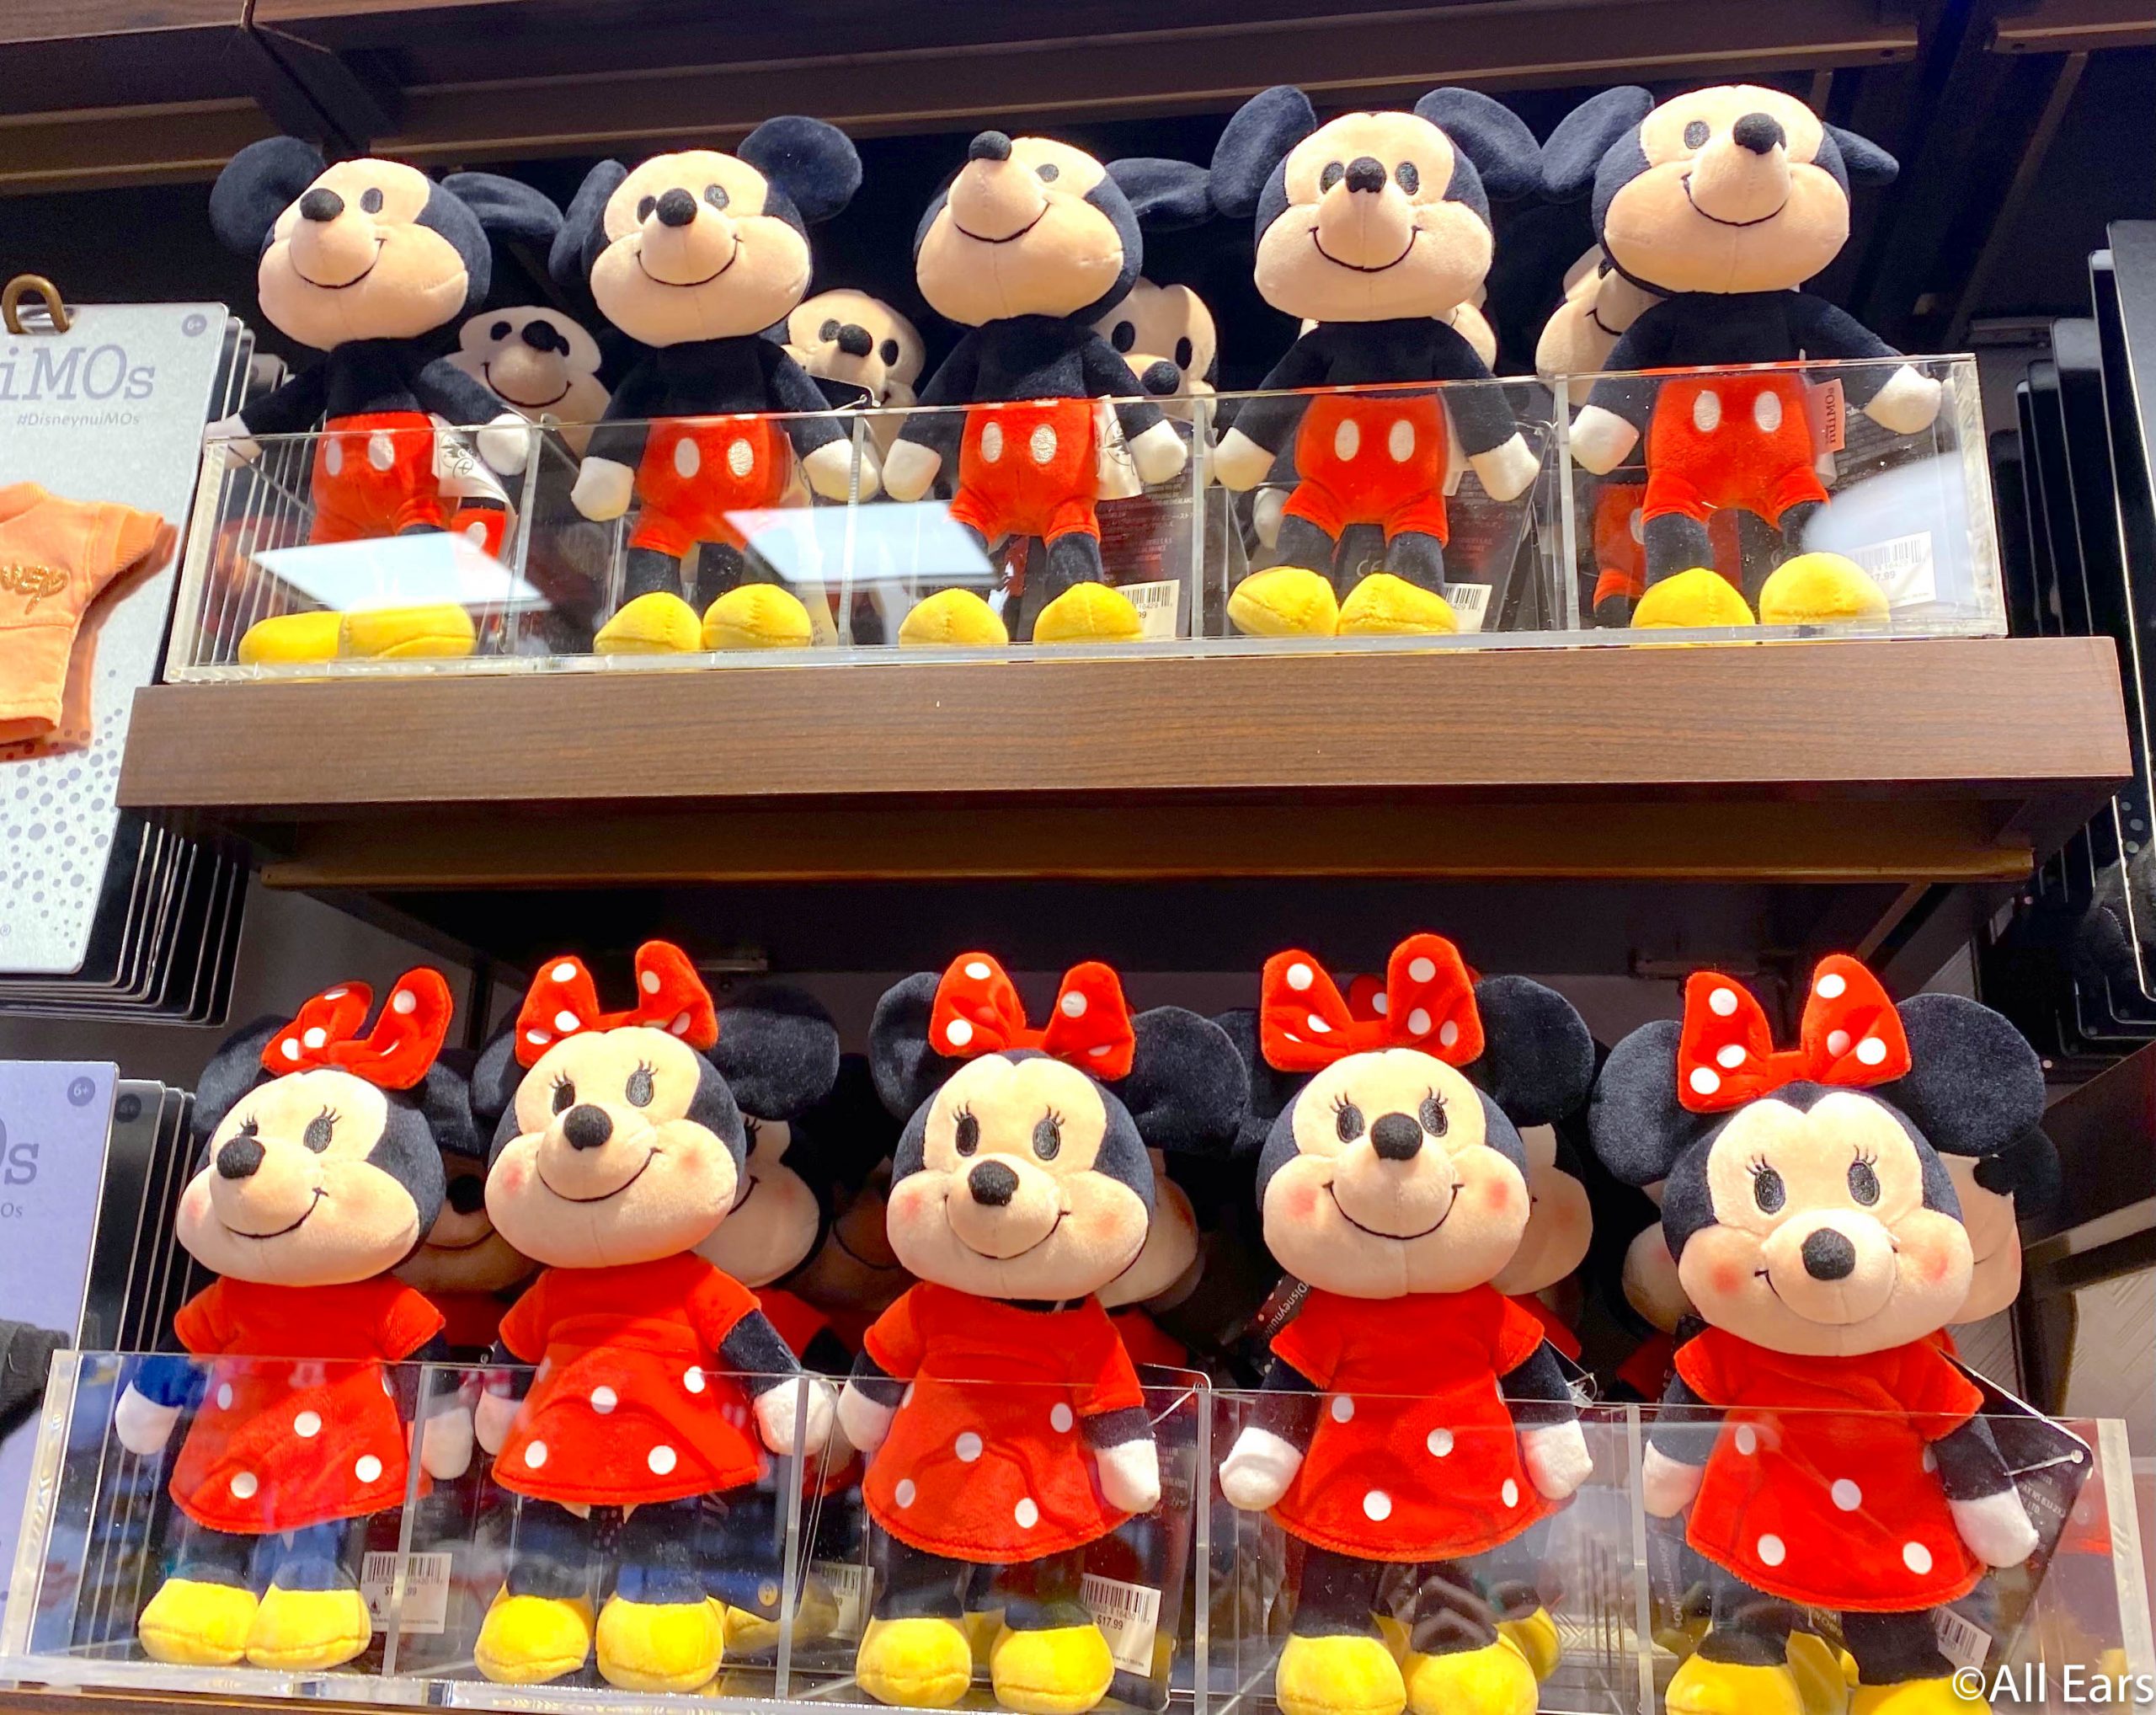 https://allears.net/wp-content/uploads/2021/01/2021-reopening-wdw-disneys-hollywood-studios-mickey-minnie-nuimo-plushes-scaled.jpg